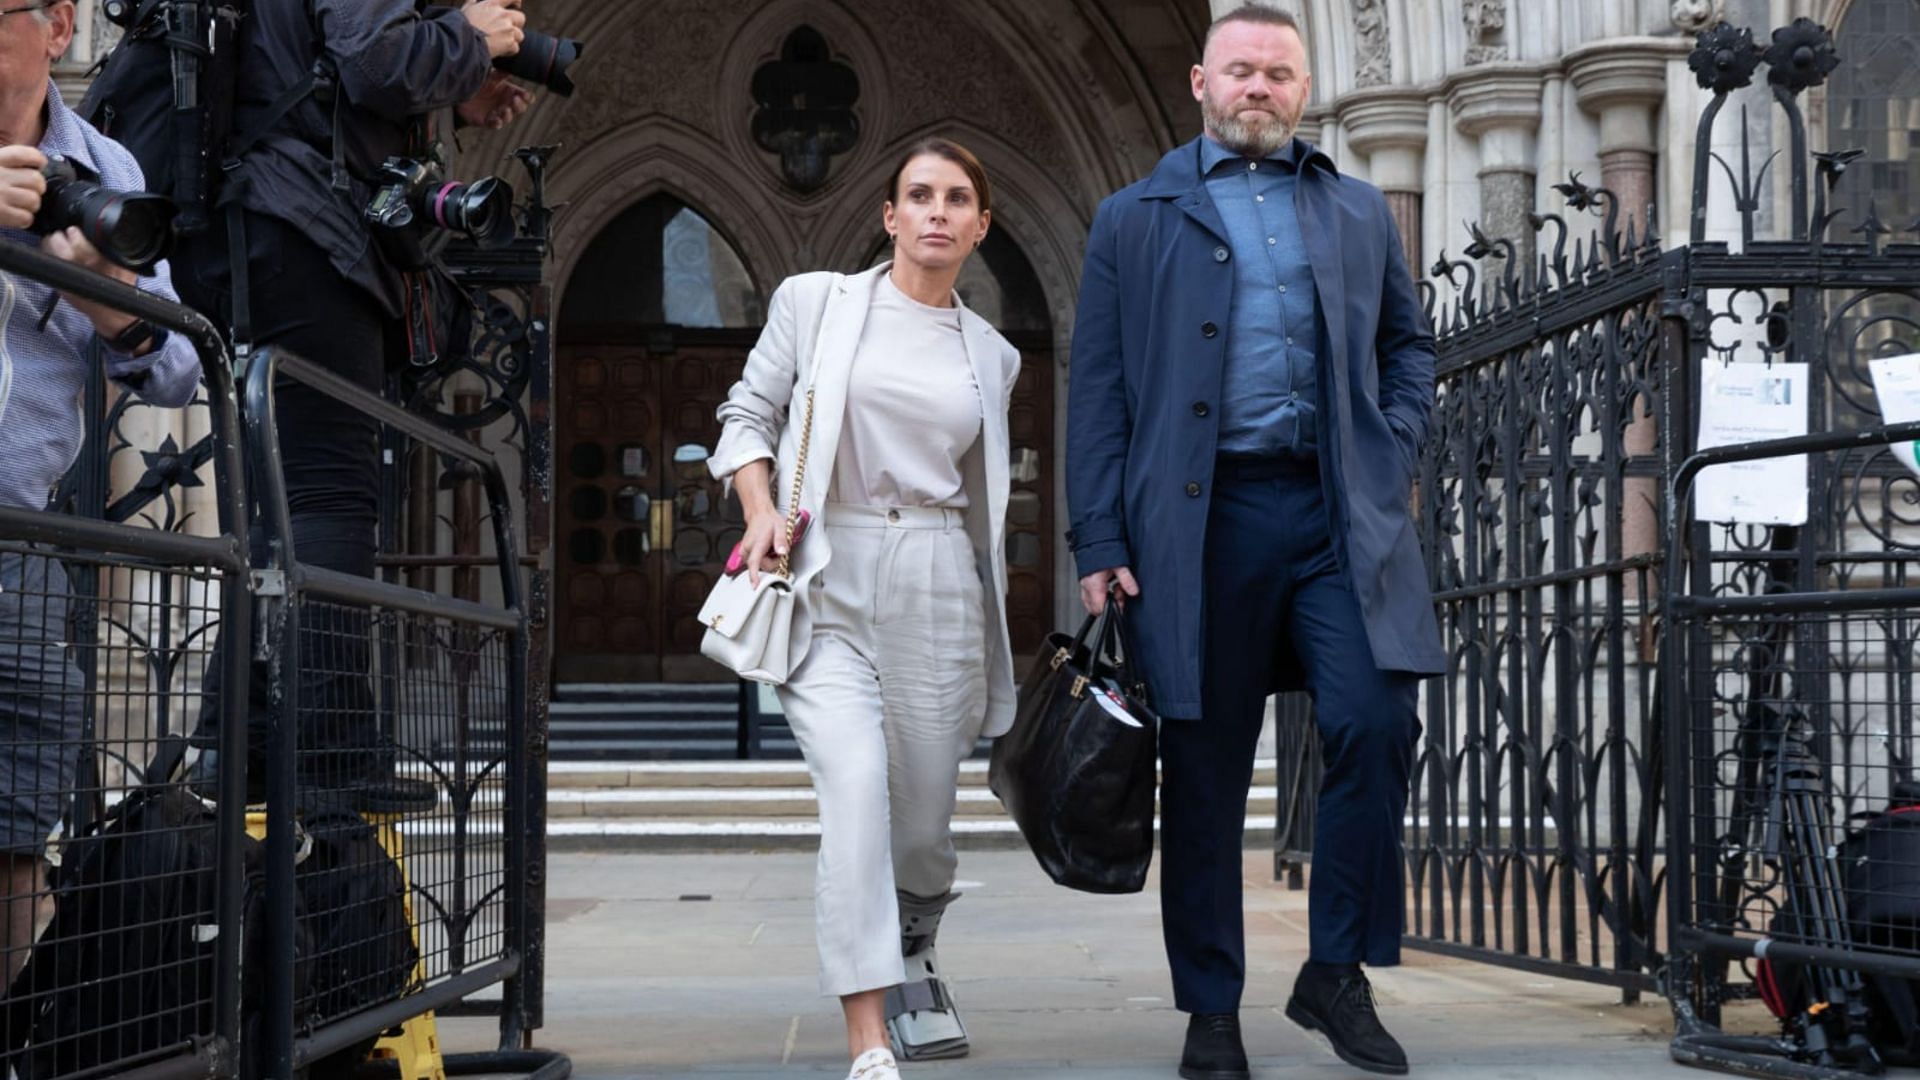 Coleen Rooney emerges victorious in a libel case against Rebekah Vardy in the highly publicized &#039;Wagatha Christie&#039; trial (Image via Twitter @/ sportbible)